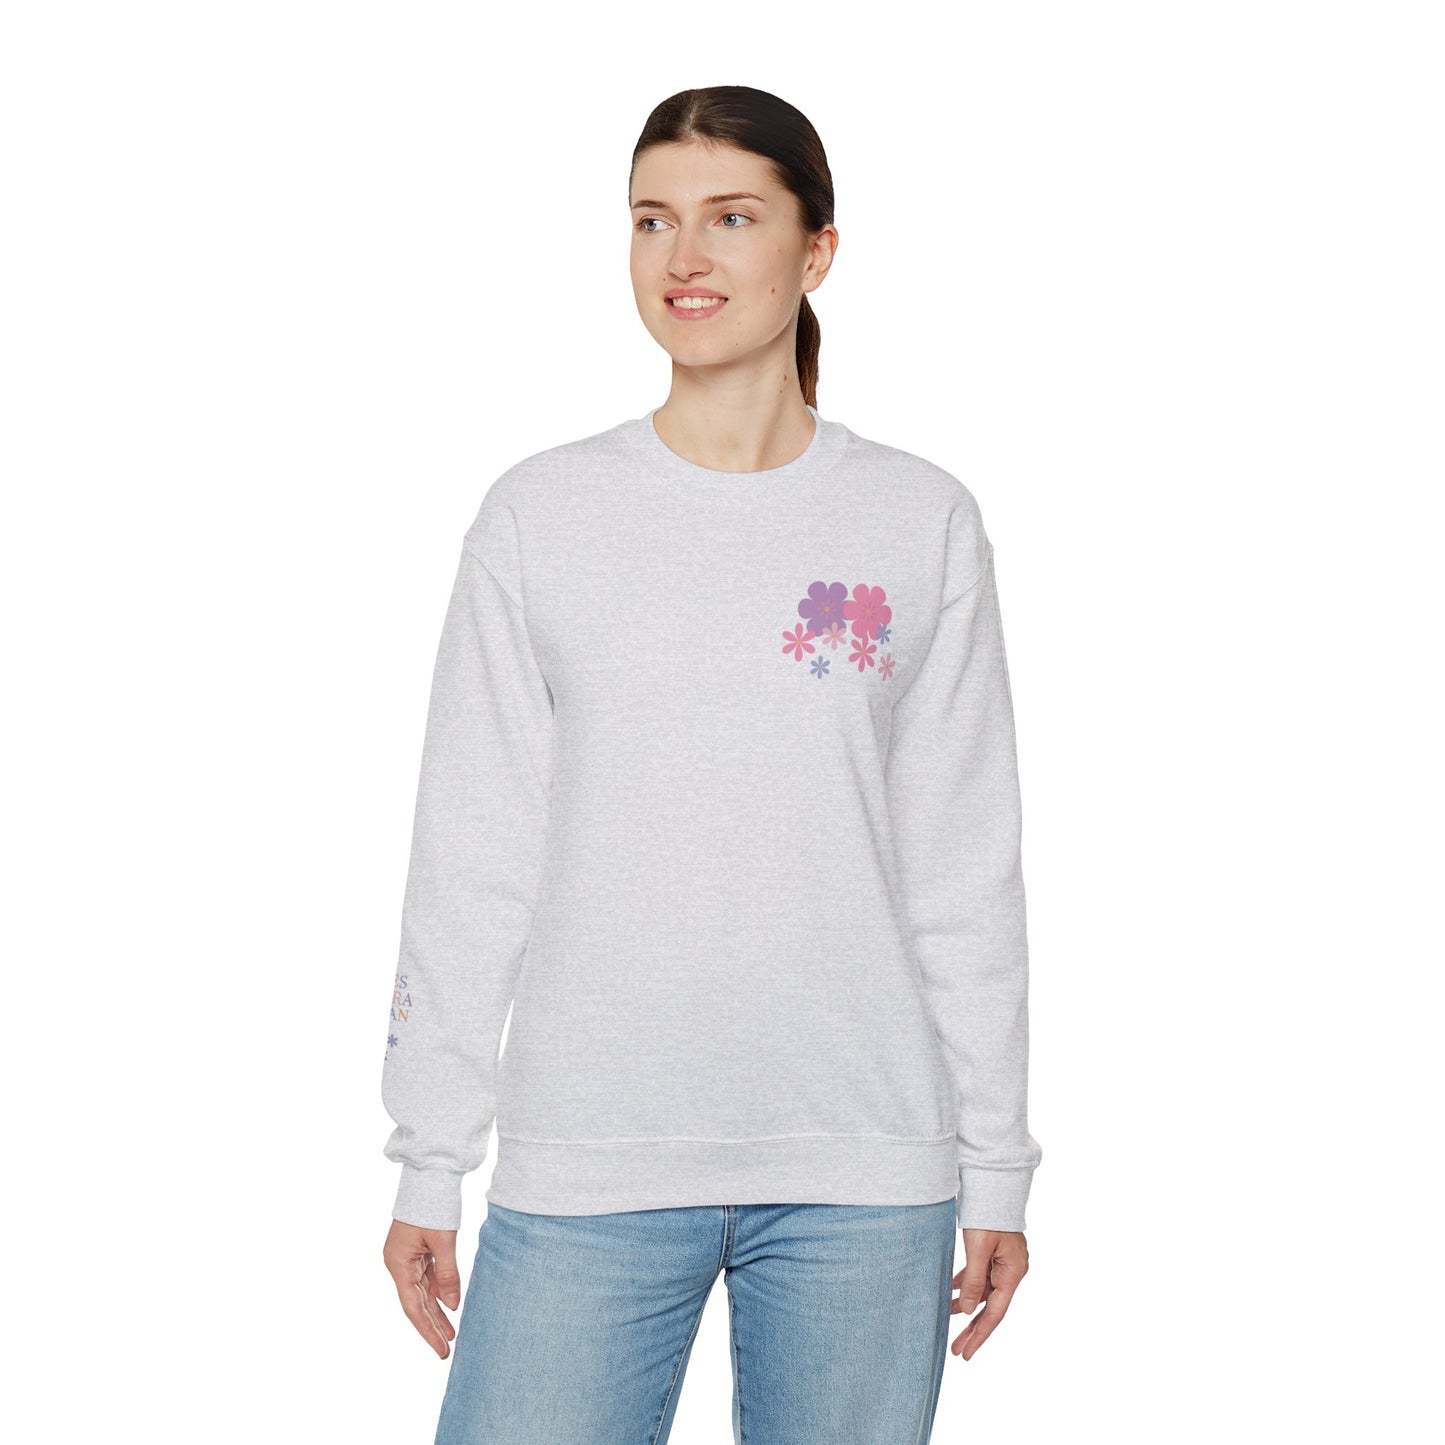 Personalized This Mama Prays Mother's Day Gift, Crewneck Sweatshirt, Personalize Sleeve with Children's Names, Mother Day Git, Christian Gift, Faith Gift